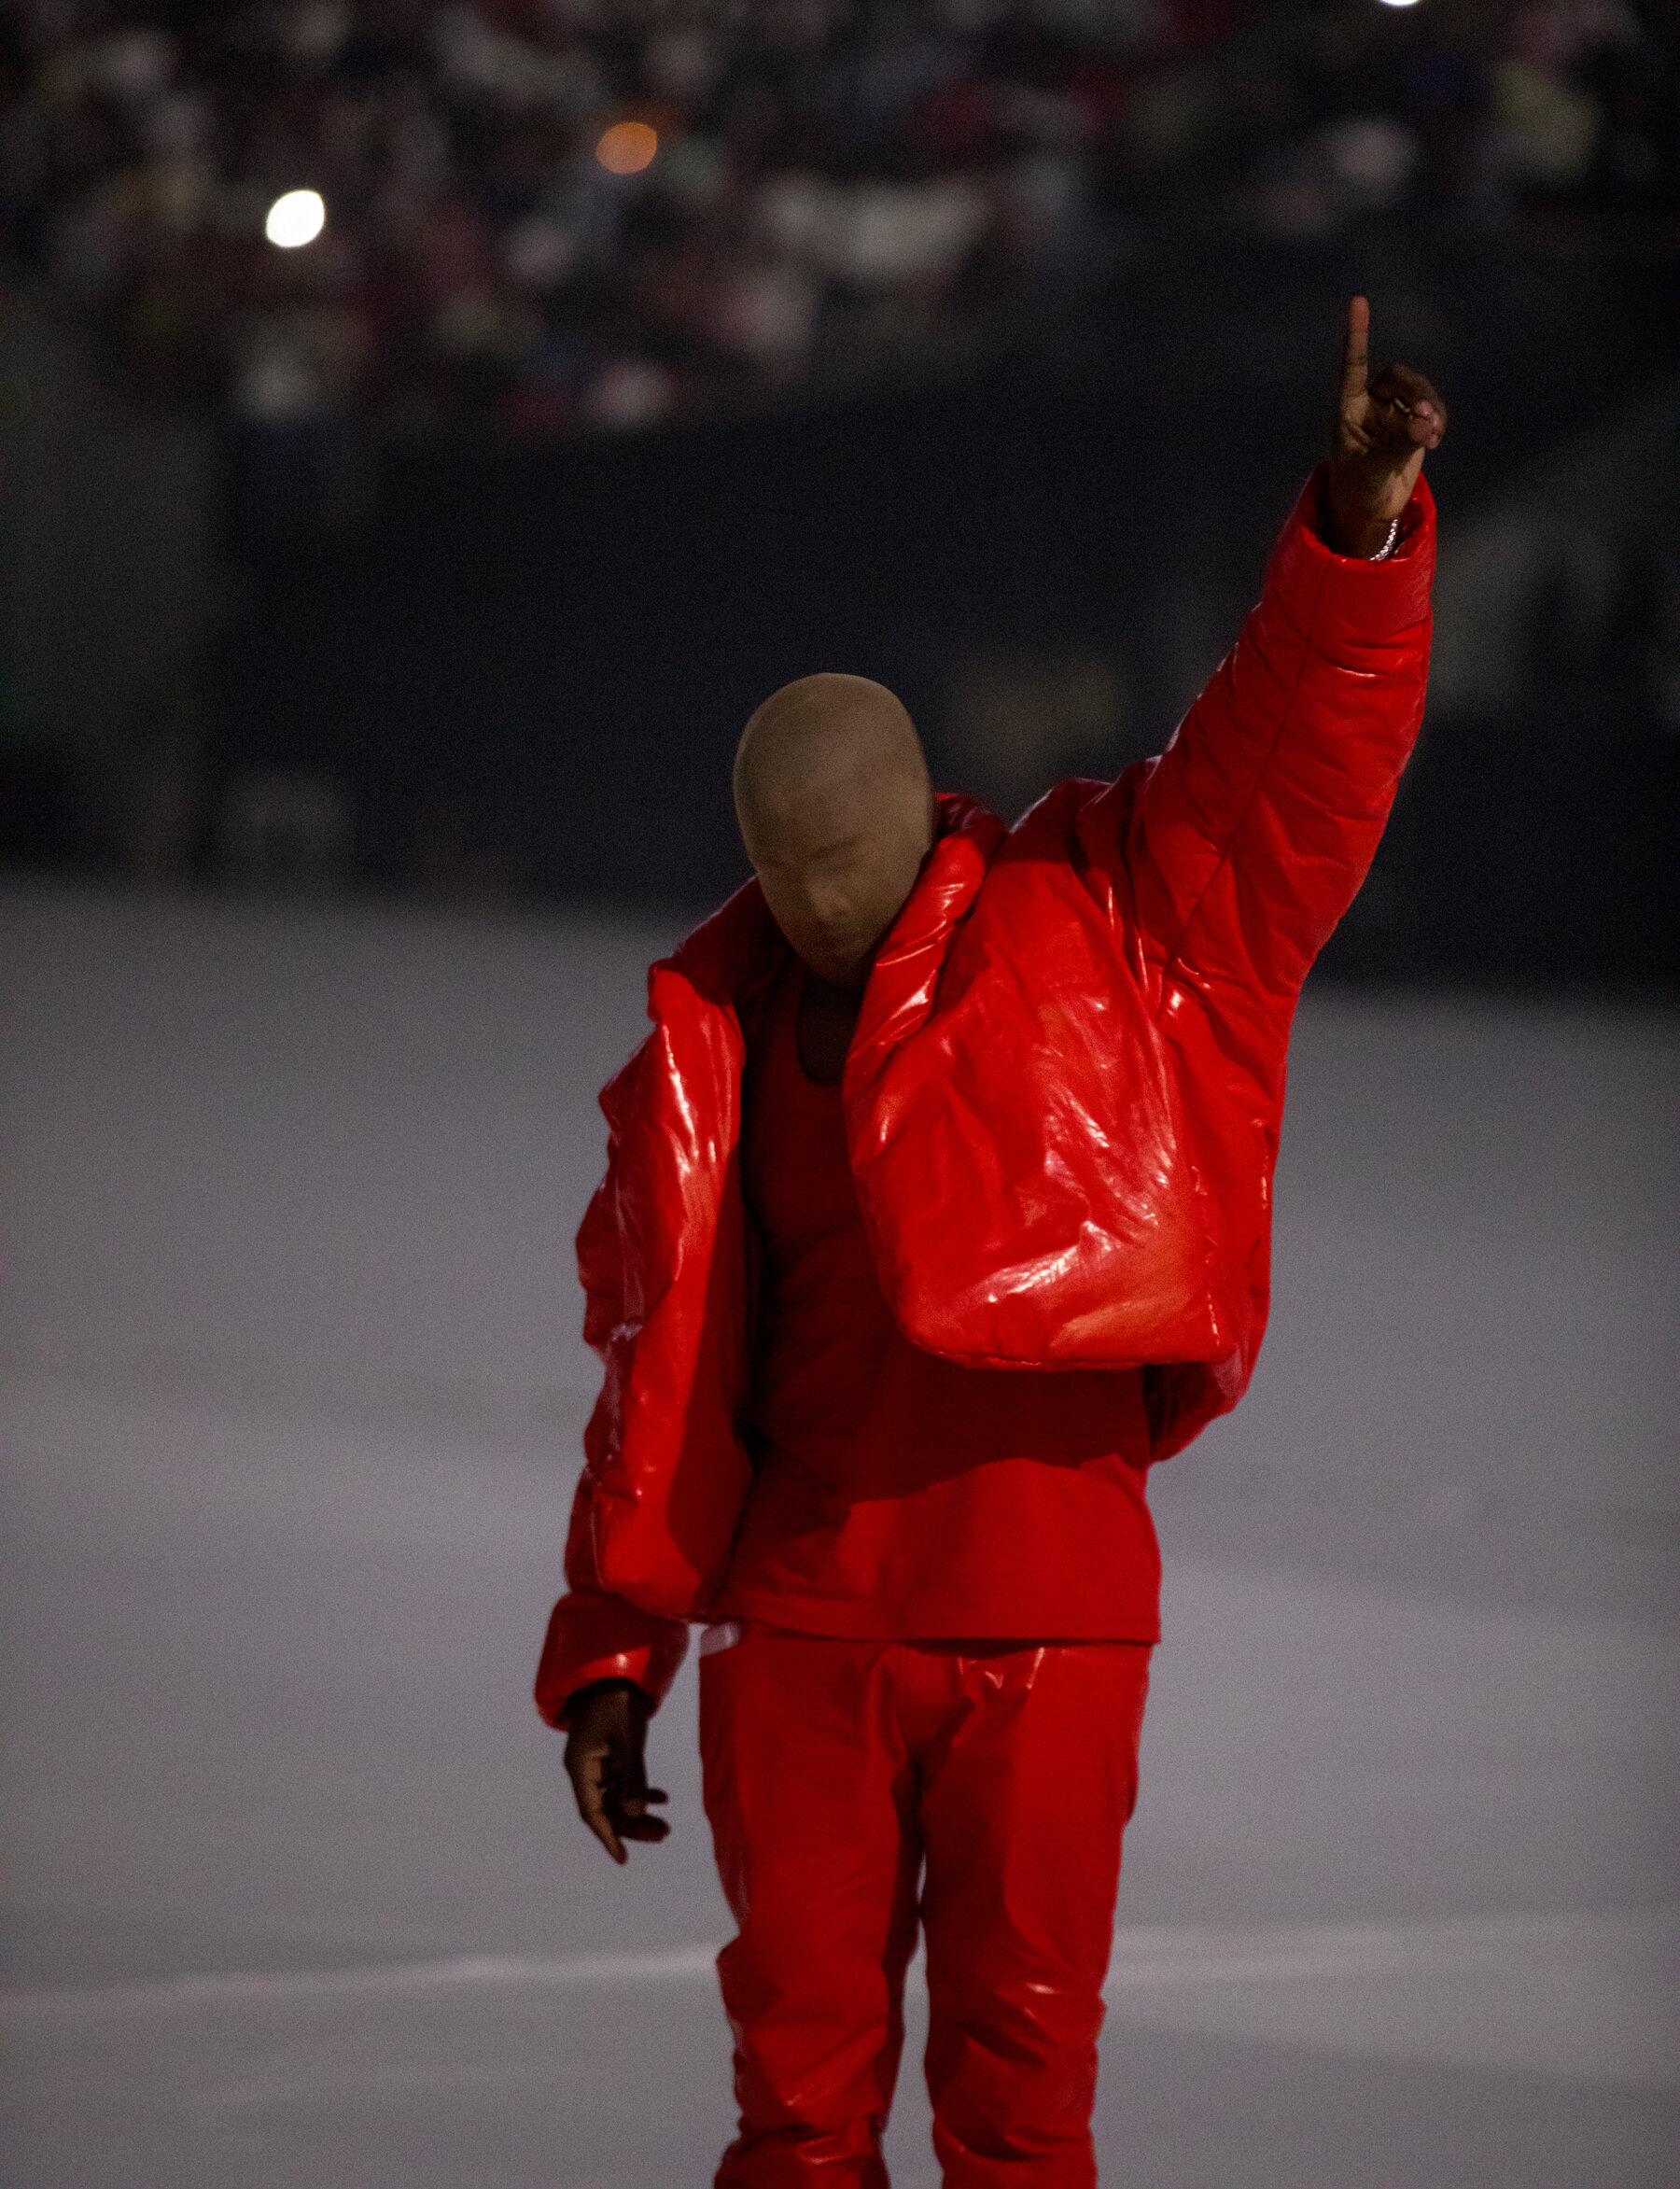 Kanye West Unveils Donda Album With a Verse From Jay Z   The